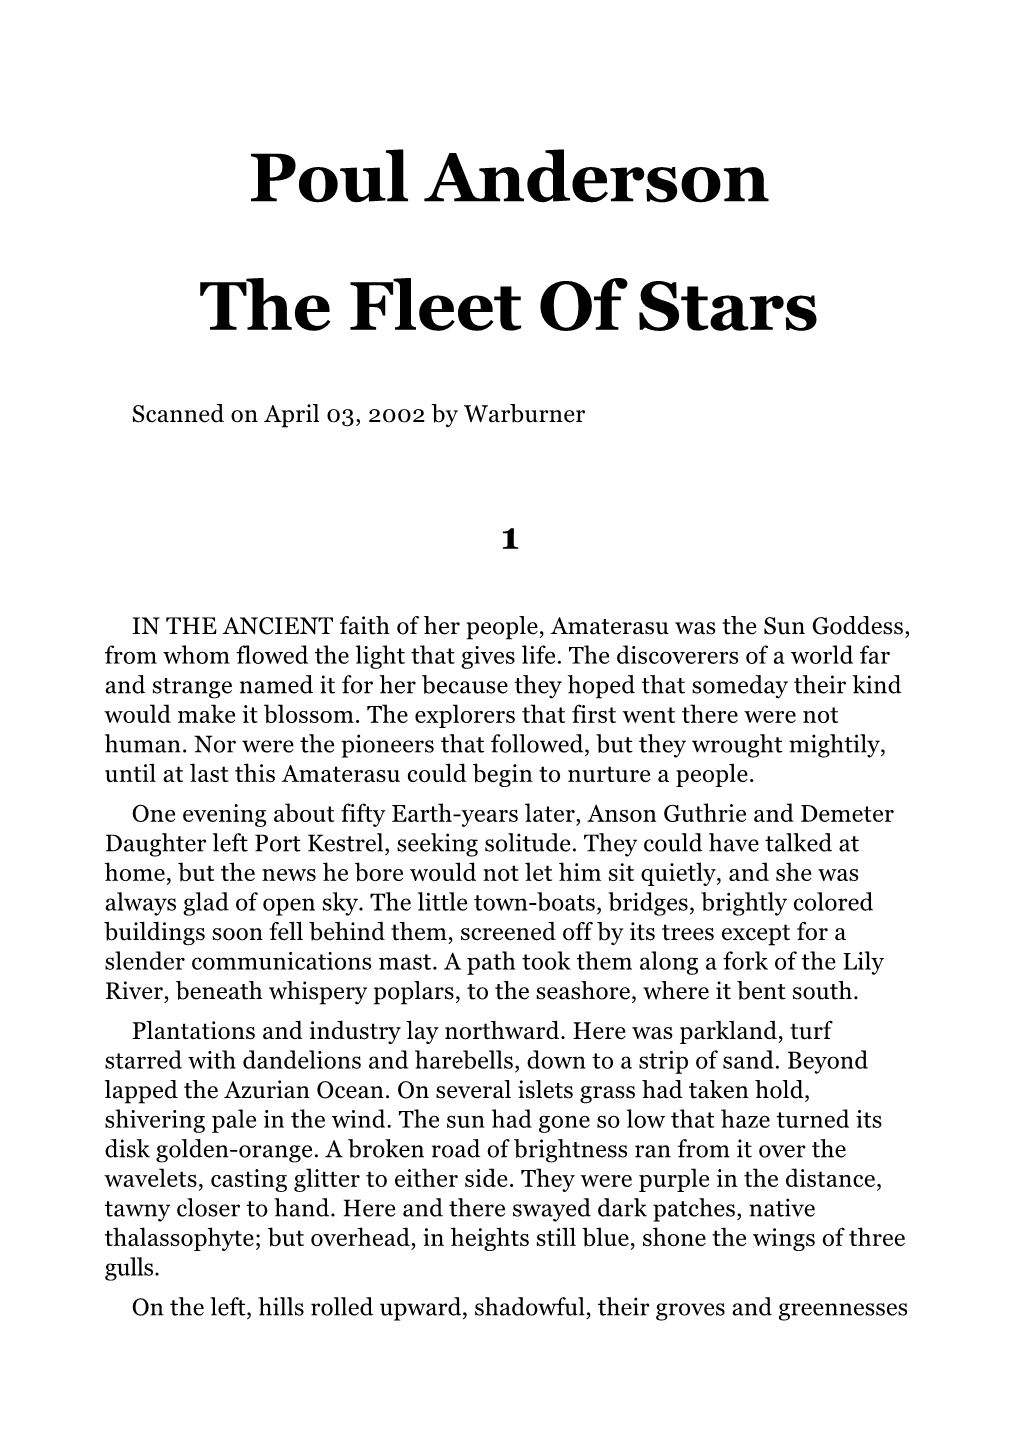 Poul Anderson the Fleet of Stars